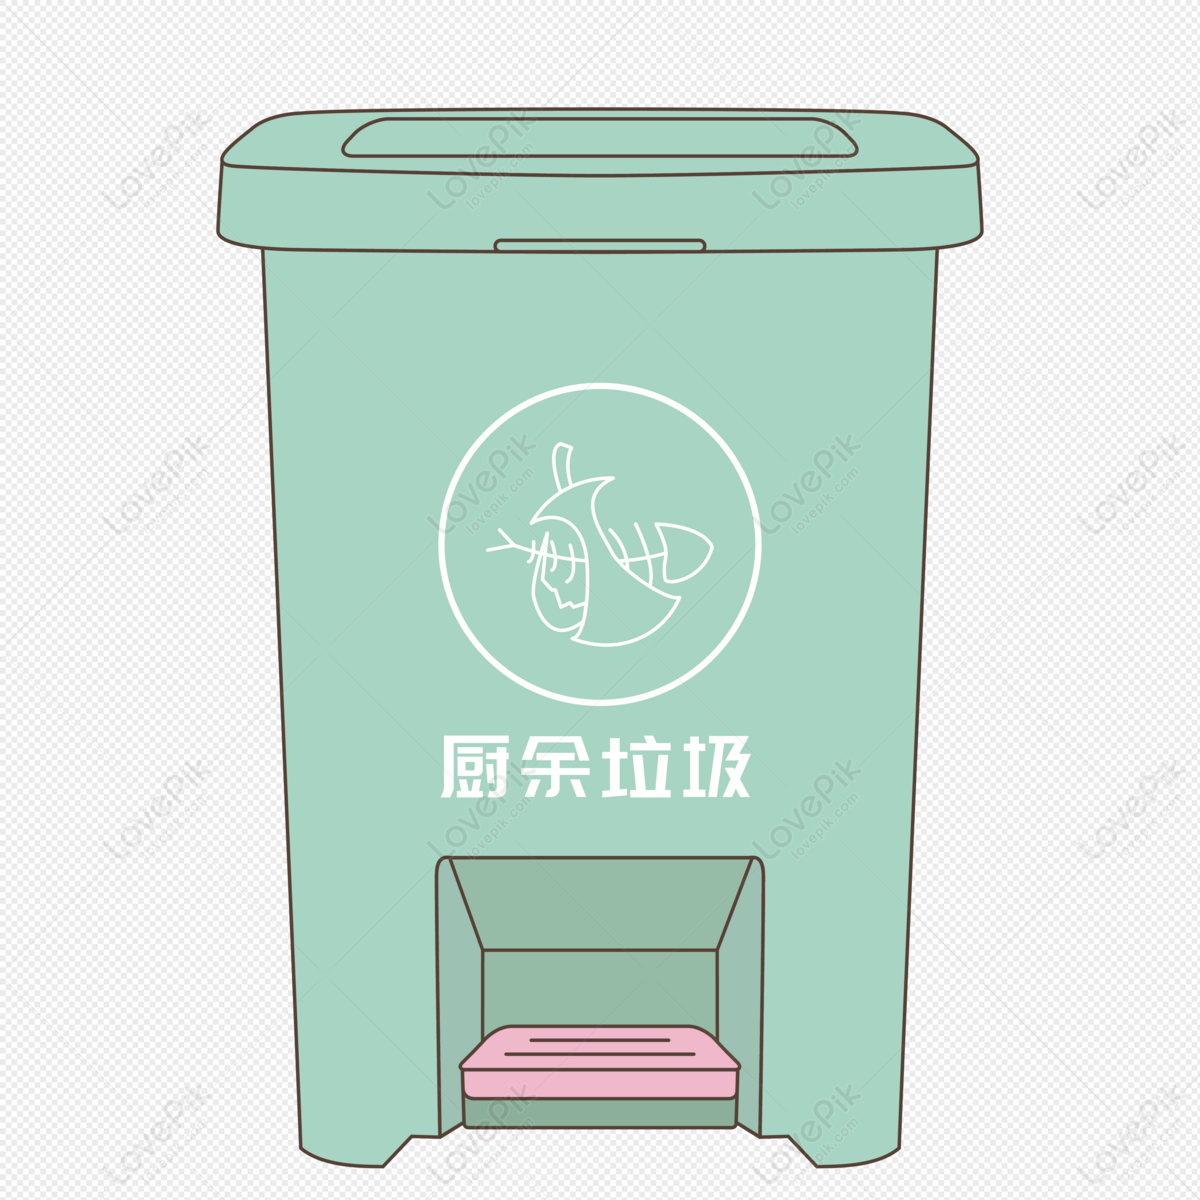 Recyclable Waste Clipart PNG Images, Waste Classification Blue Red Green  Gray Recyclable Non Recyclable Waste Elements, Refuse Classification,  Garbage, Recyclable PNG Image For Free Download